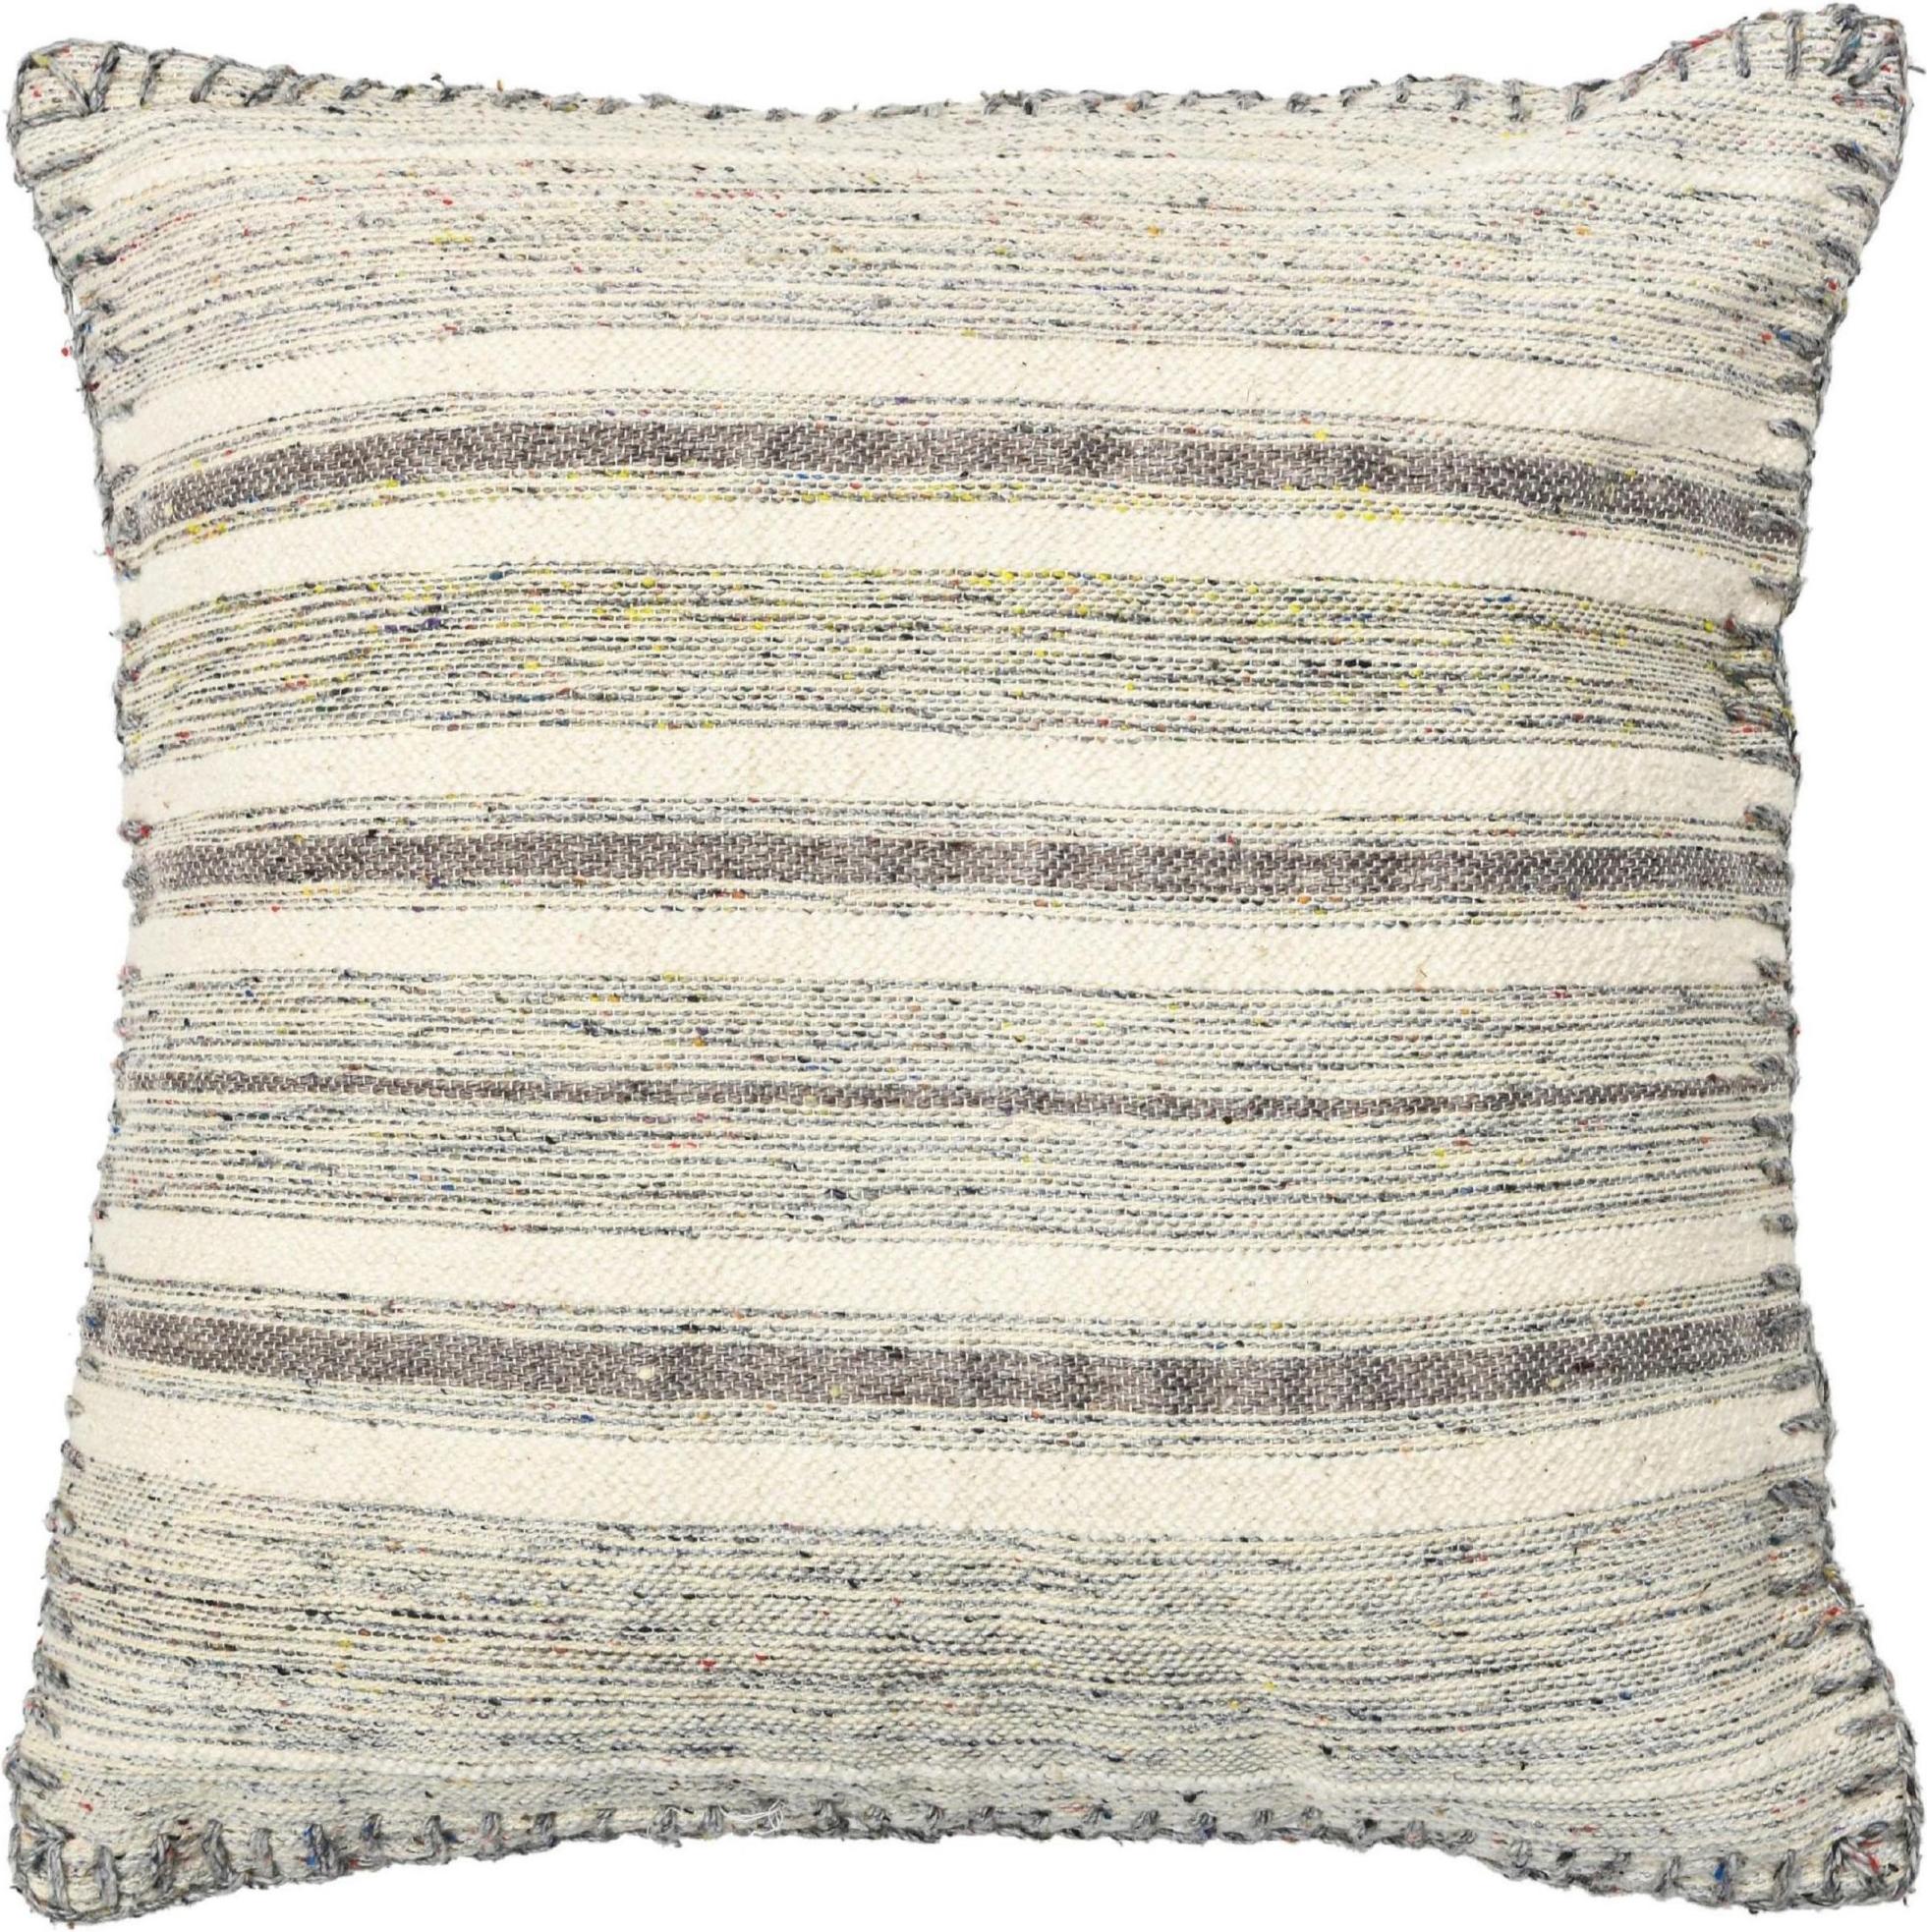 Hand-Knotted Modern Chic Wool and Cotton Pillow With Striped Design In Gray For Sale